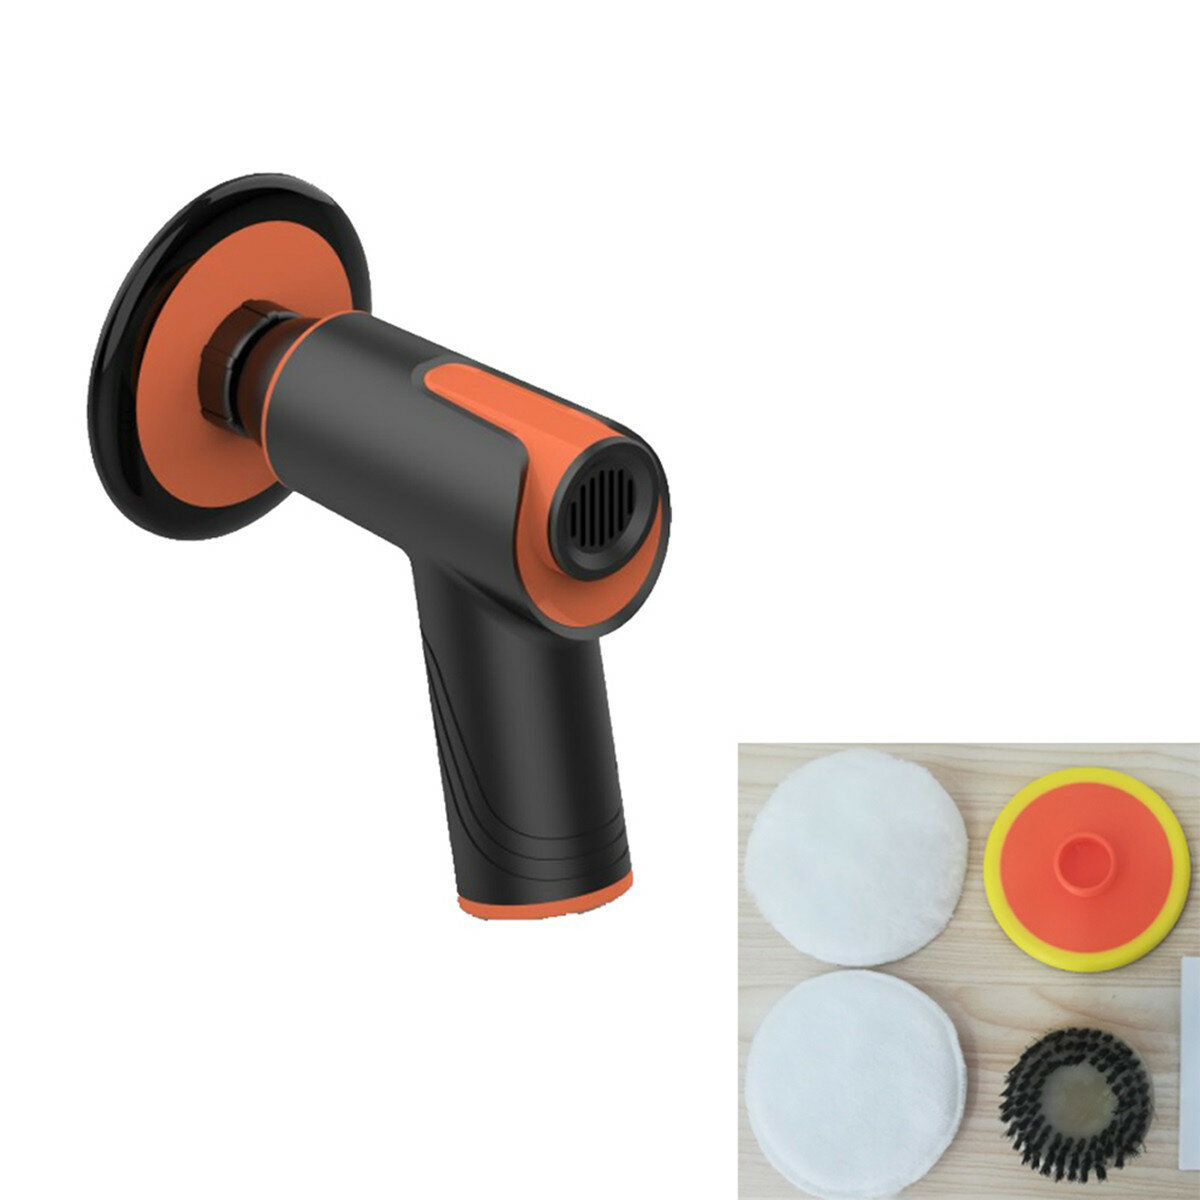 best price,100w,110mm,2000mah,rechargeable,polisher,discount